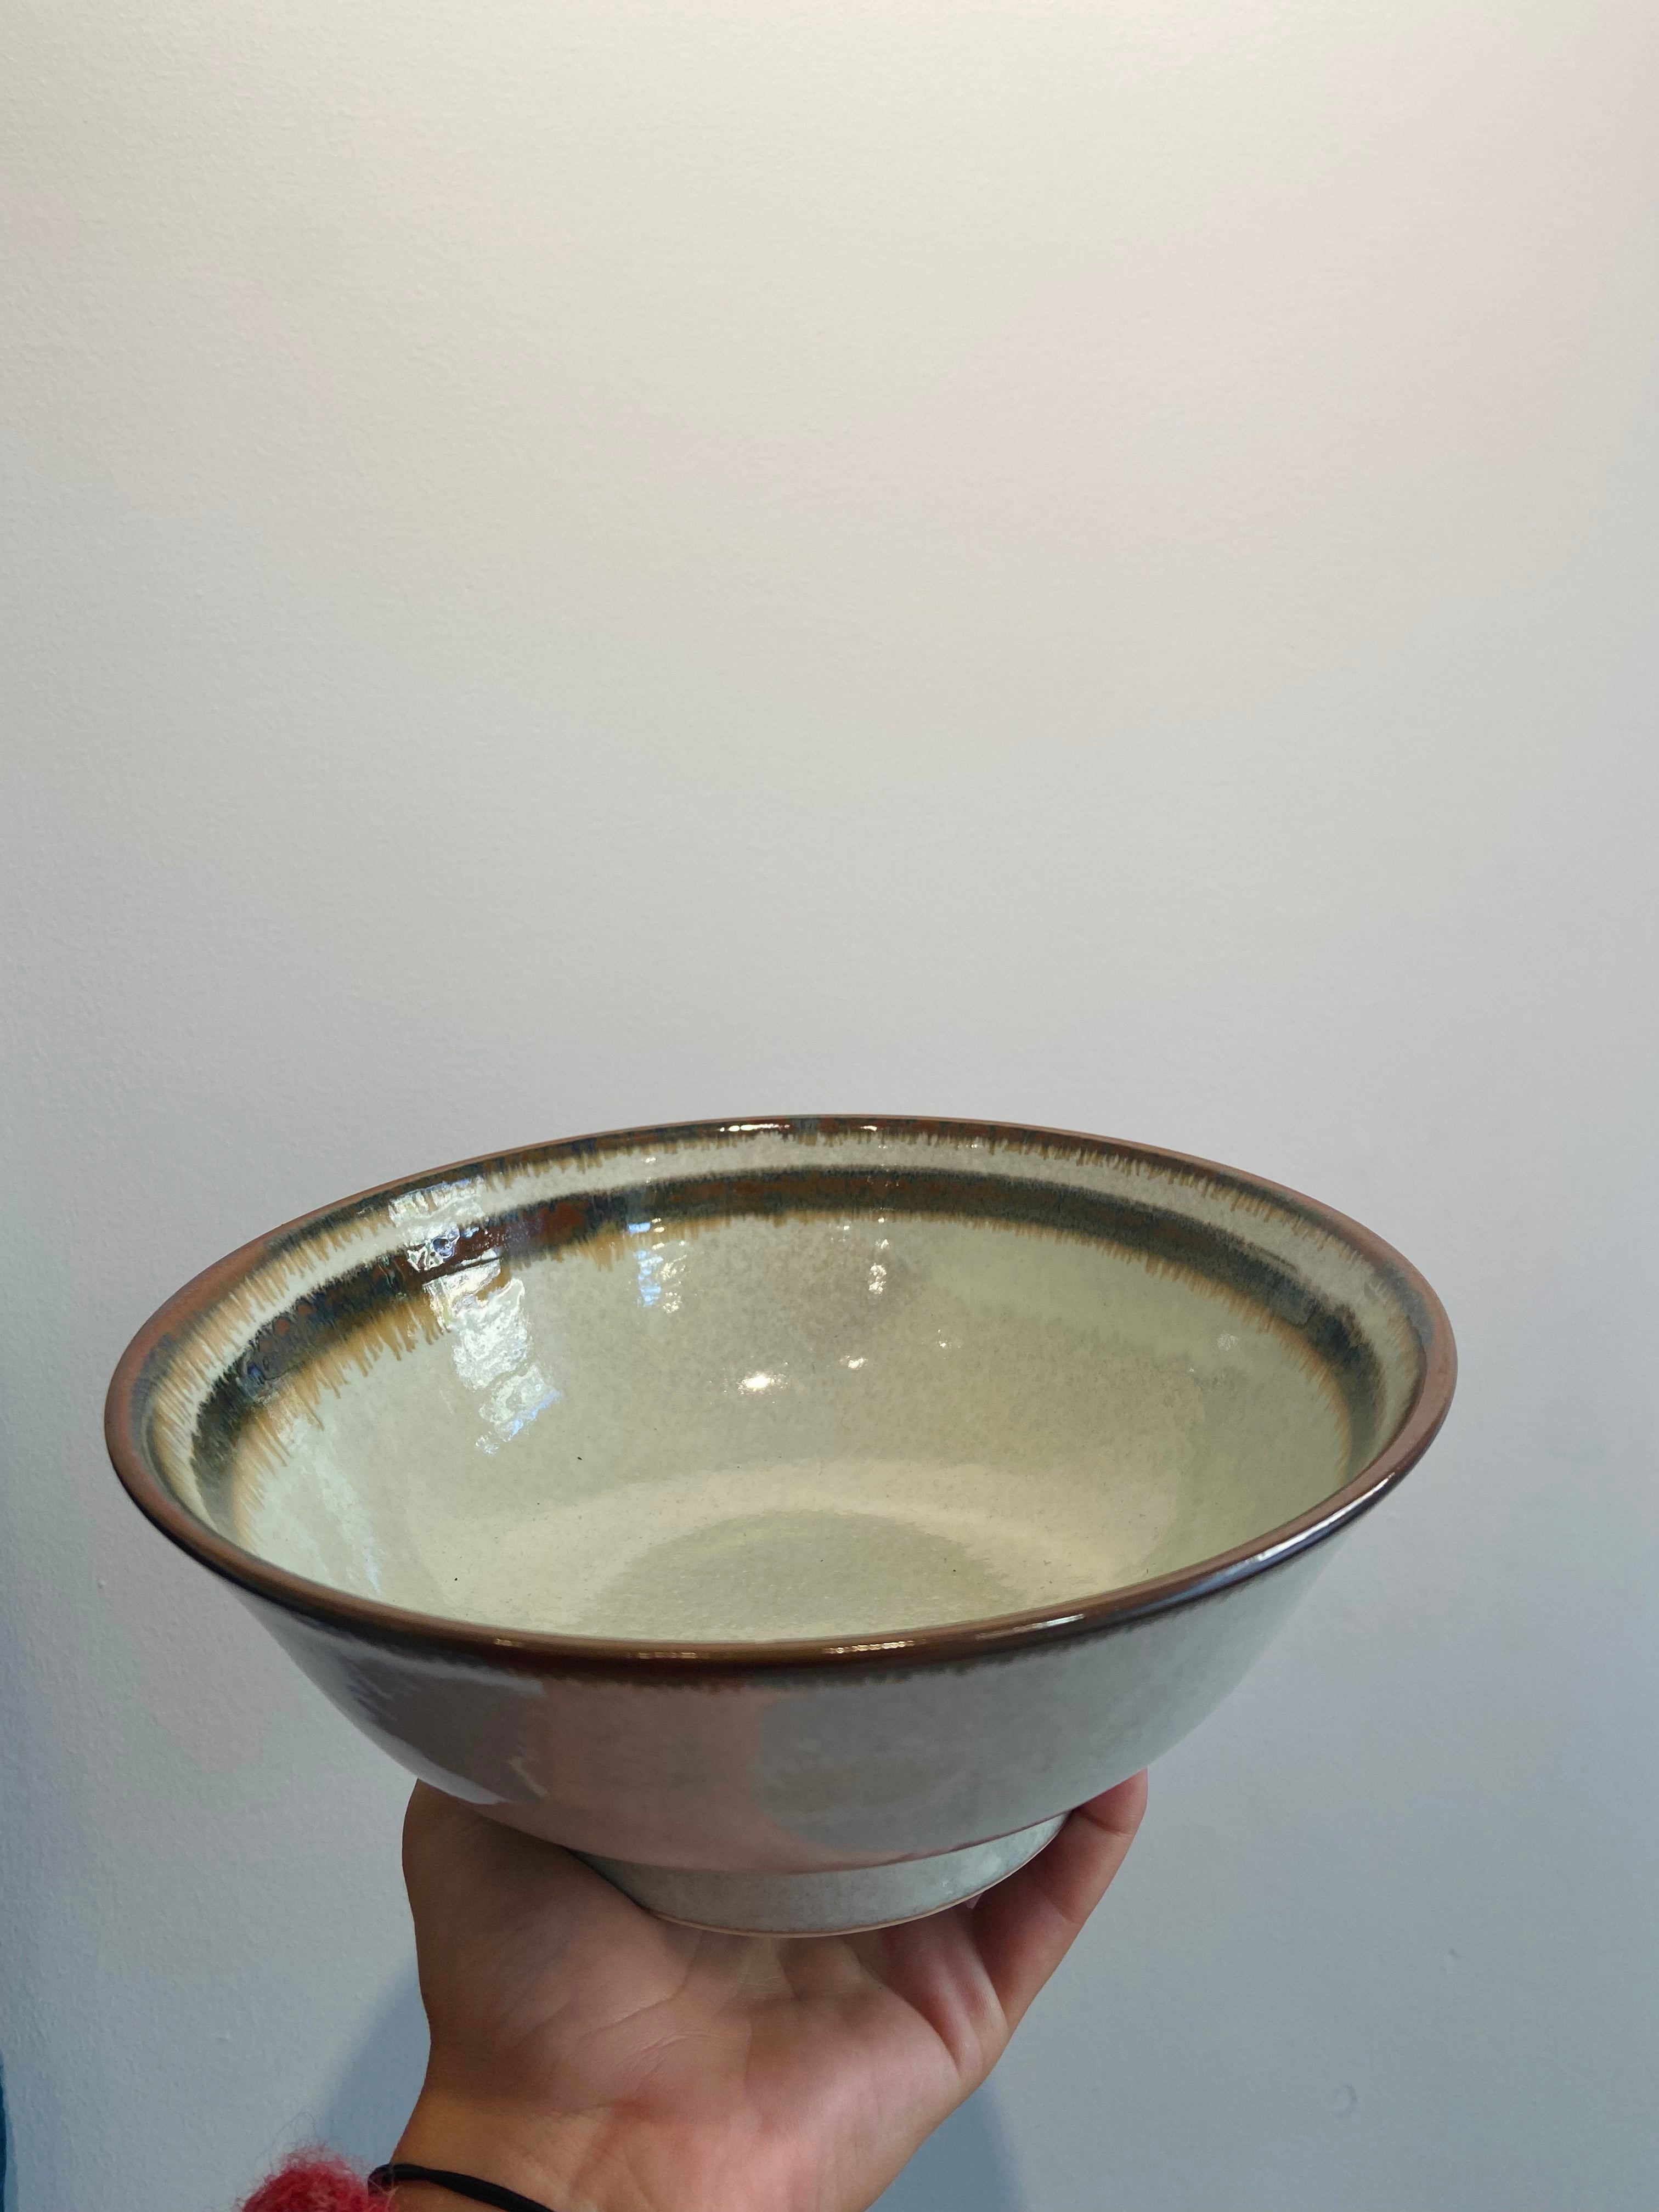 Japanese ramen bowl in brownish and beige shades